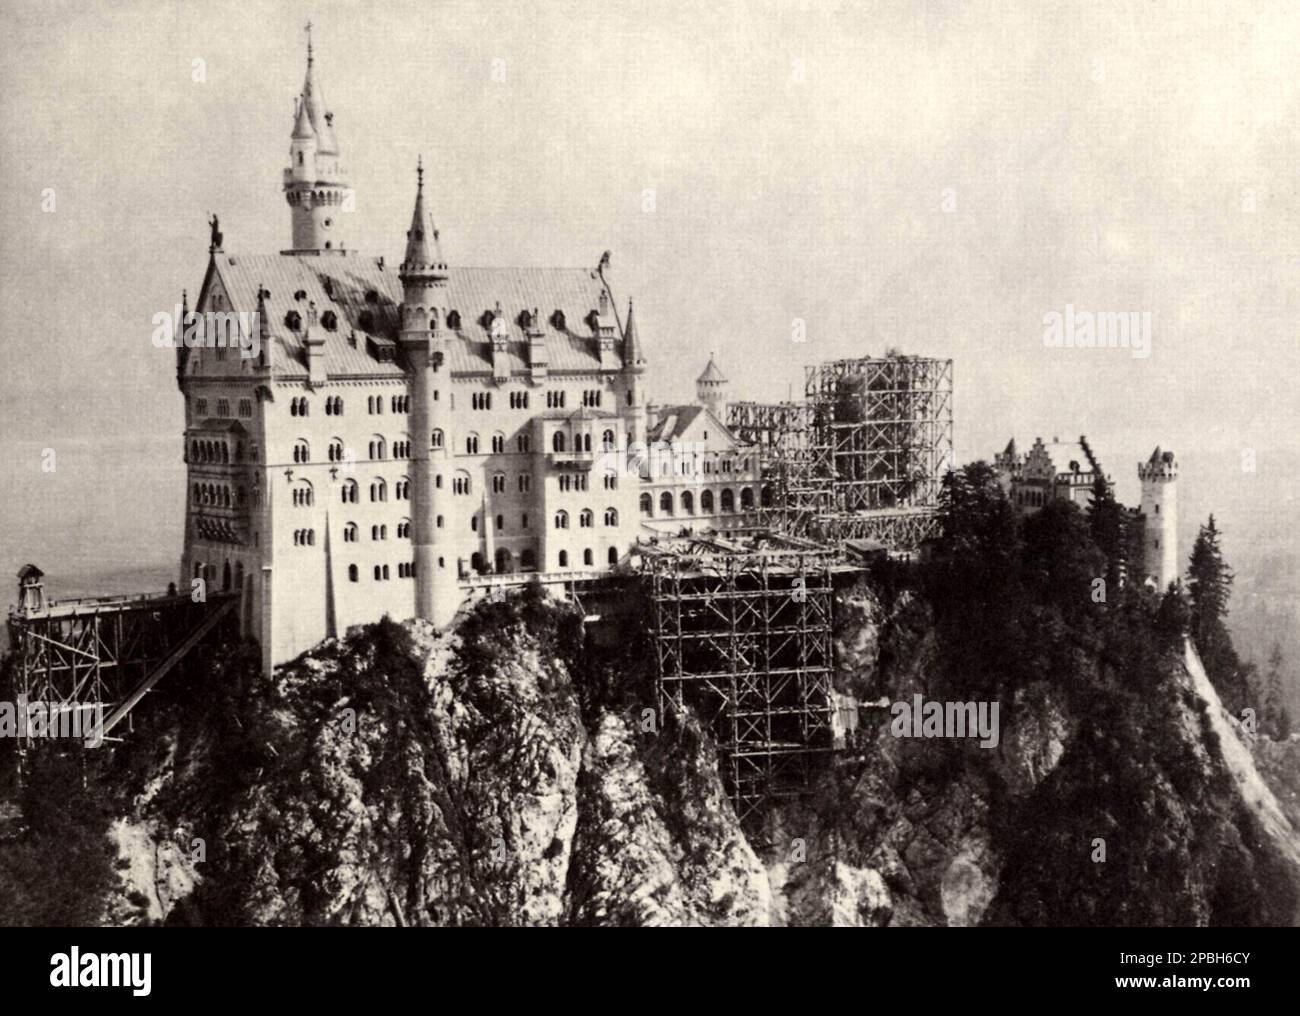 1882-1885 ca , Bavaria , Germany  : The castle of SCHLOSS NEUSCHWANSTEIN during the edification, by the King von Bayer LUDWIG II ( Louis ) of Wittelsbach  , King of Bavaria , known as ' Mad King Ludwig '  ( August 25, 1845 – June 13, 1886 ).  King of Bavaria from 1864 until his death. Ludwig ascended to the Bavarian throne at age 18, following his father's death. His youth and brooding good looks made him wildly popular in Bavaria and abroad. One of his first acts was official patronage of his idol, the German opera composer Richard Wagner -  RE - REALI - ROYALTY - nobili -  Nobiltà  - BAVIERA Stock Photo